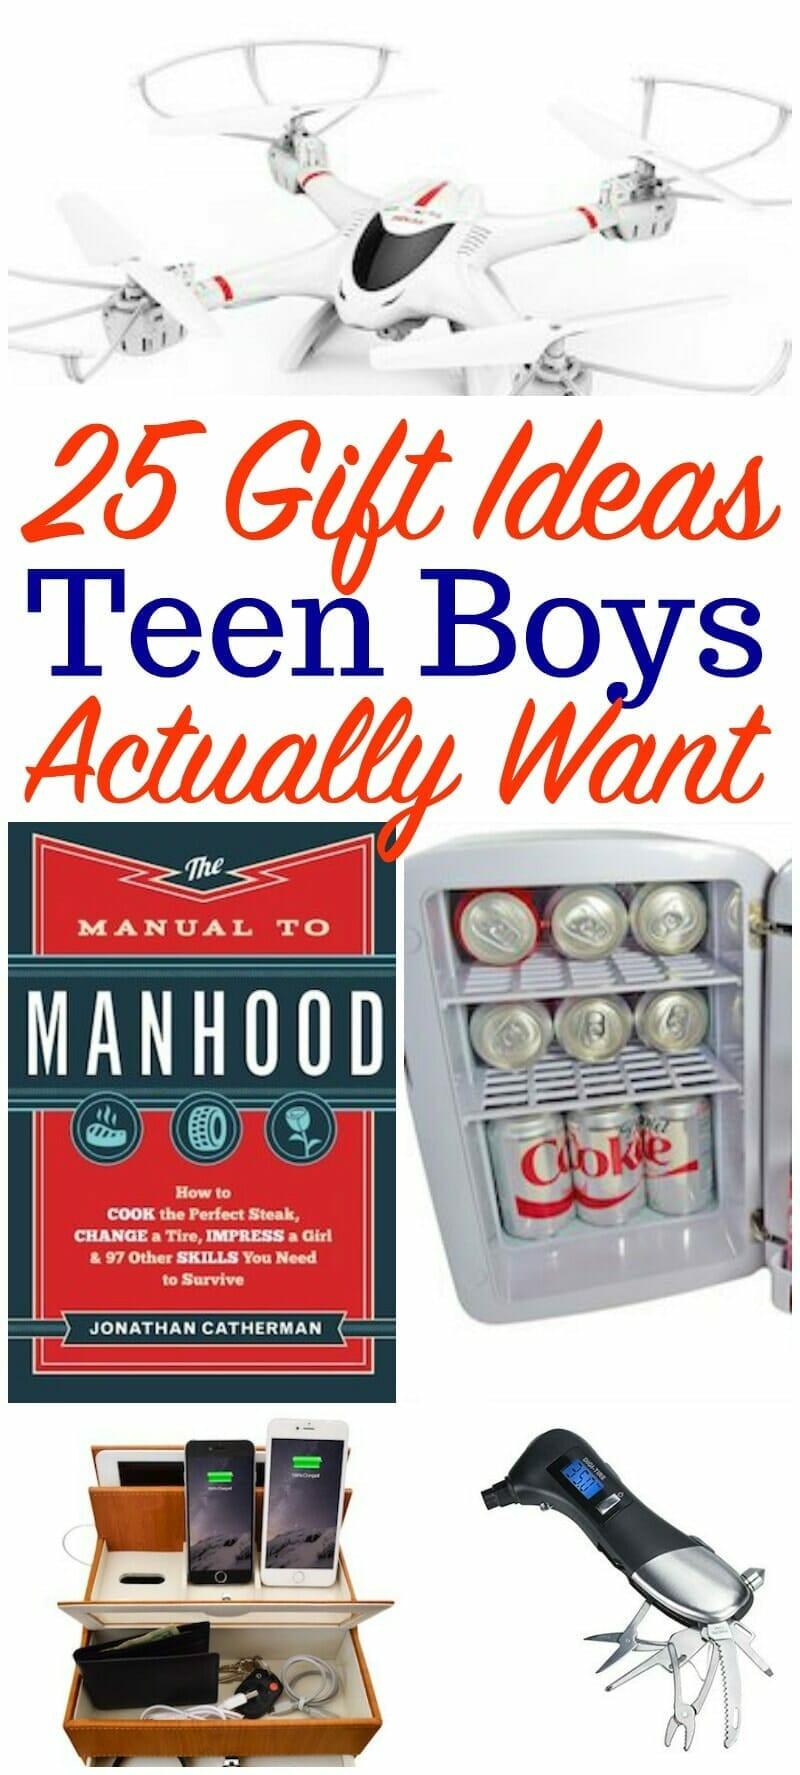 Gift Ideas For Young Boys
 25 Teen Boy Gift Ideas Perfect for Christmas or Birthday